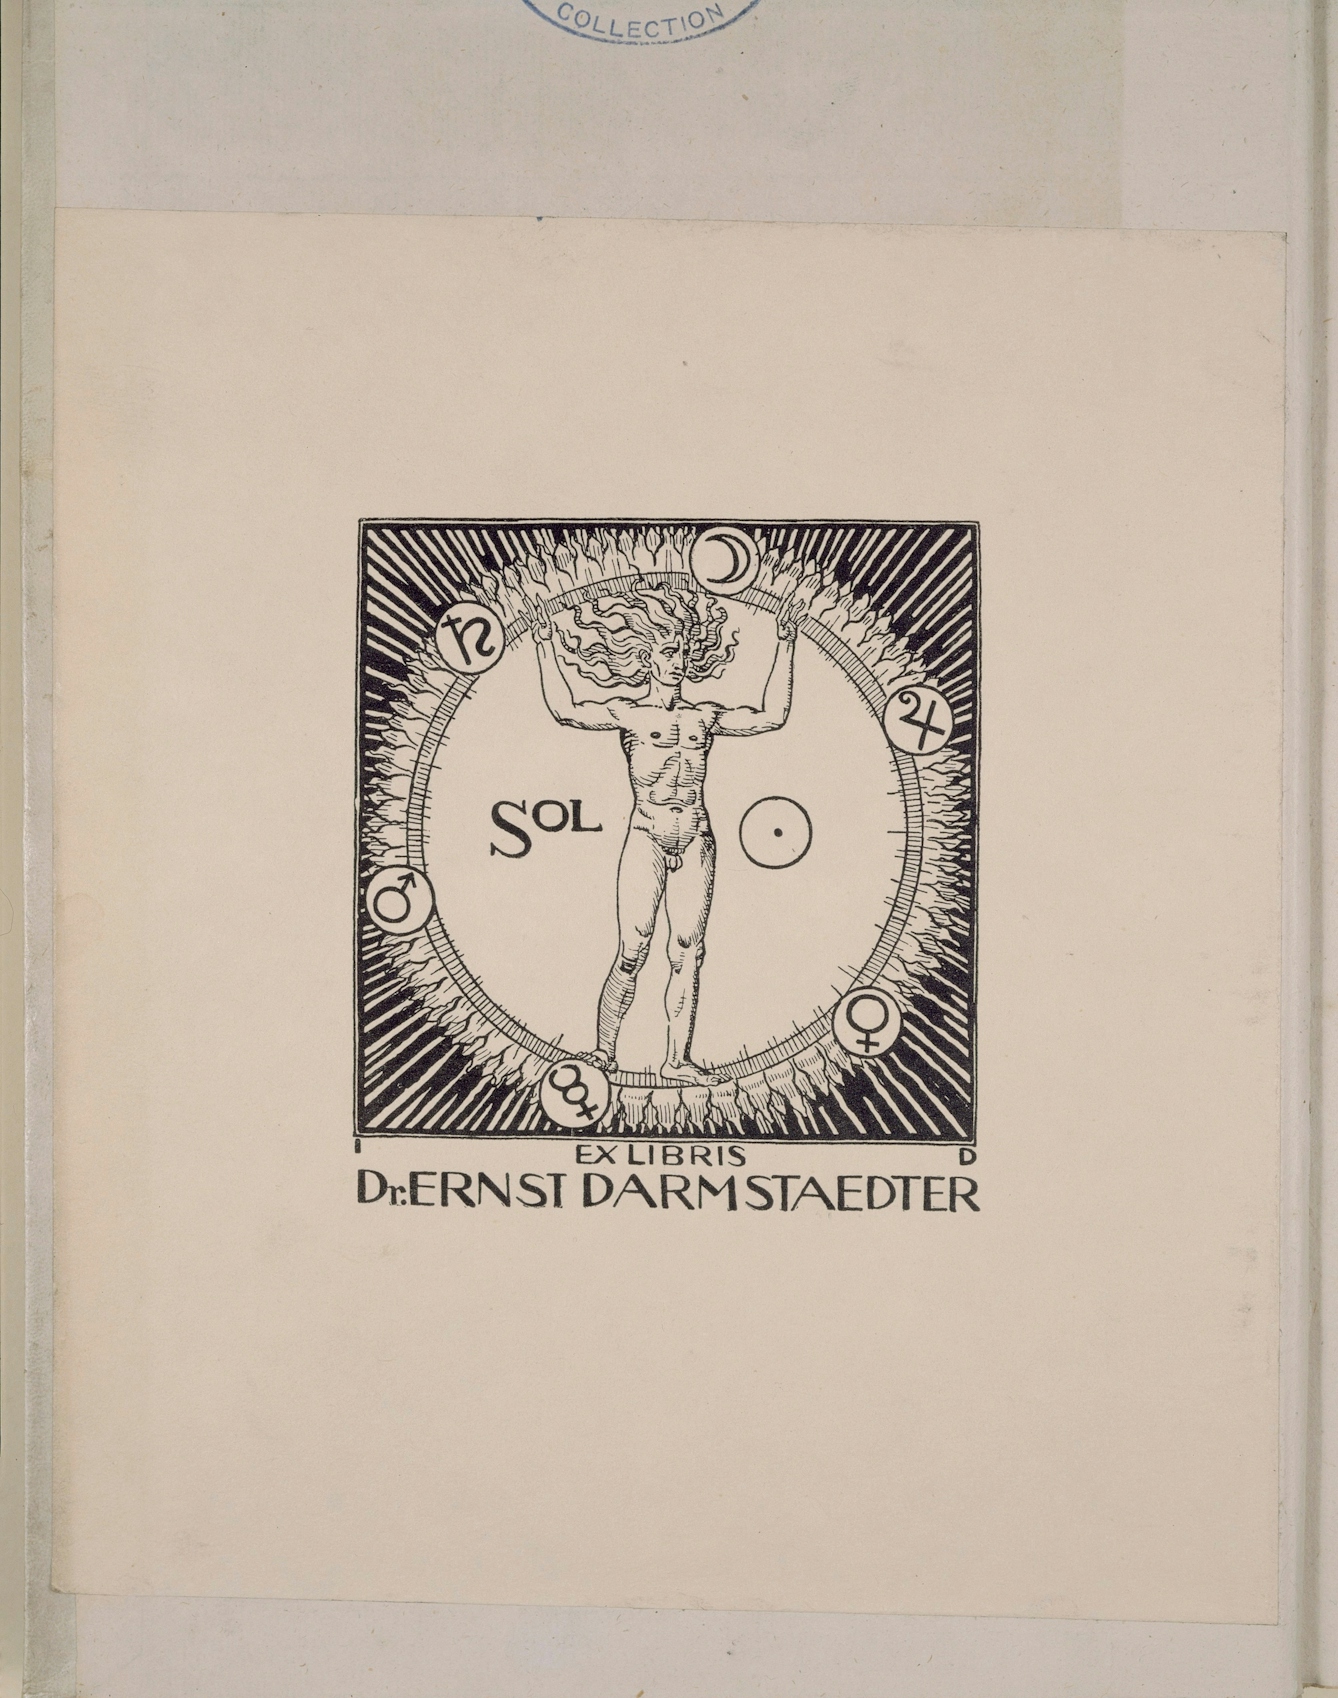 Bookplate depicting a nude male figure standing inside a ring with flames and cosmological symbols around the edge.  Below the image are the words 'Ex Libris Dr. Ernst Darmstaedter.'